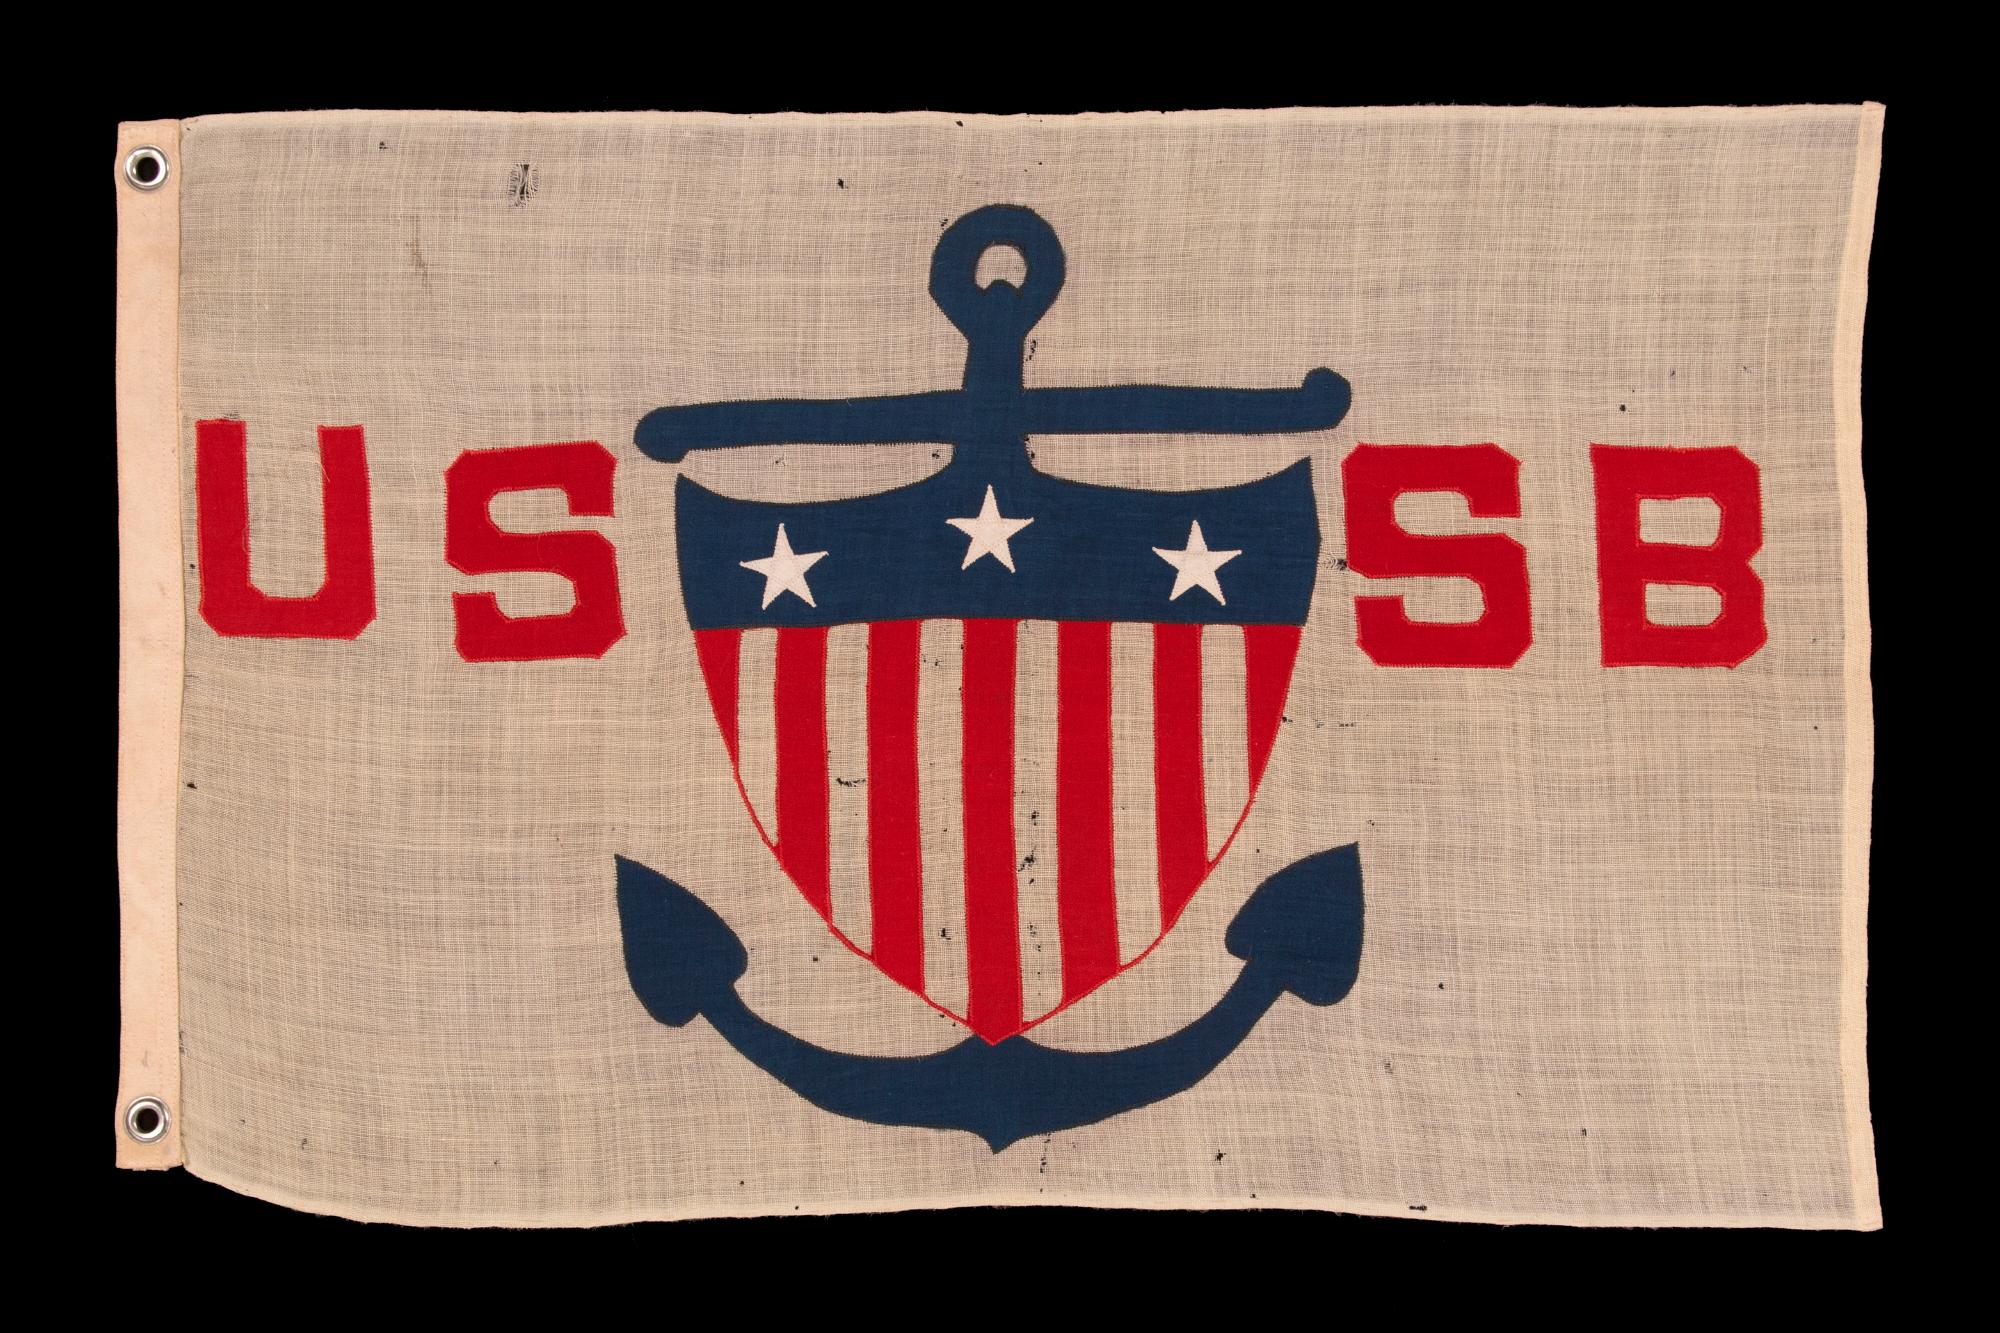 United States shipping board flag, an extremely scarce and beautiful, nautical design, made sometime between WWI (U.S. Involvement 1917-18) and 1934

Flag of the United States Shipping Board (U.S.S.B.), an extremely scarce and beautiful design,